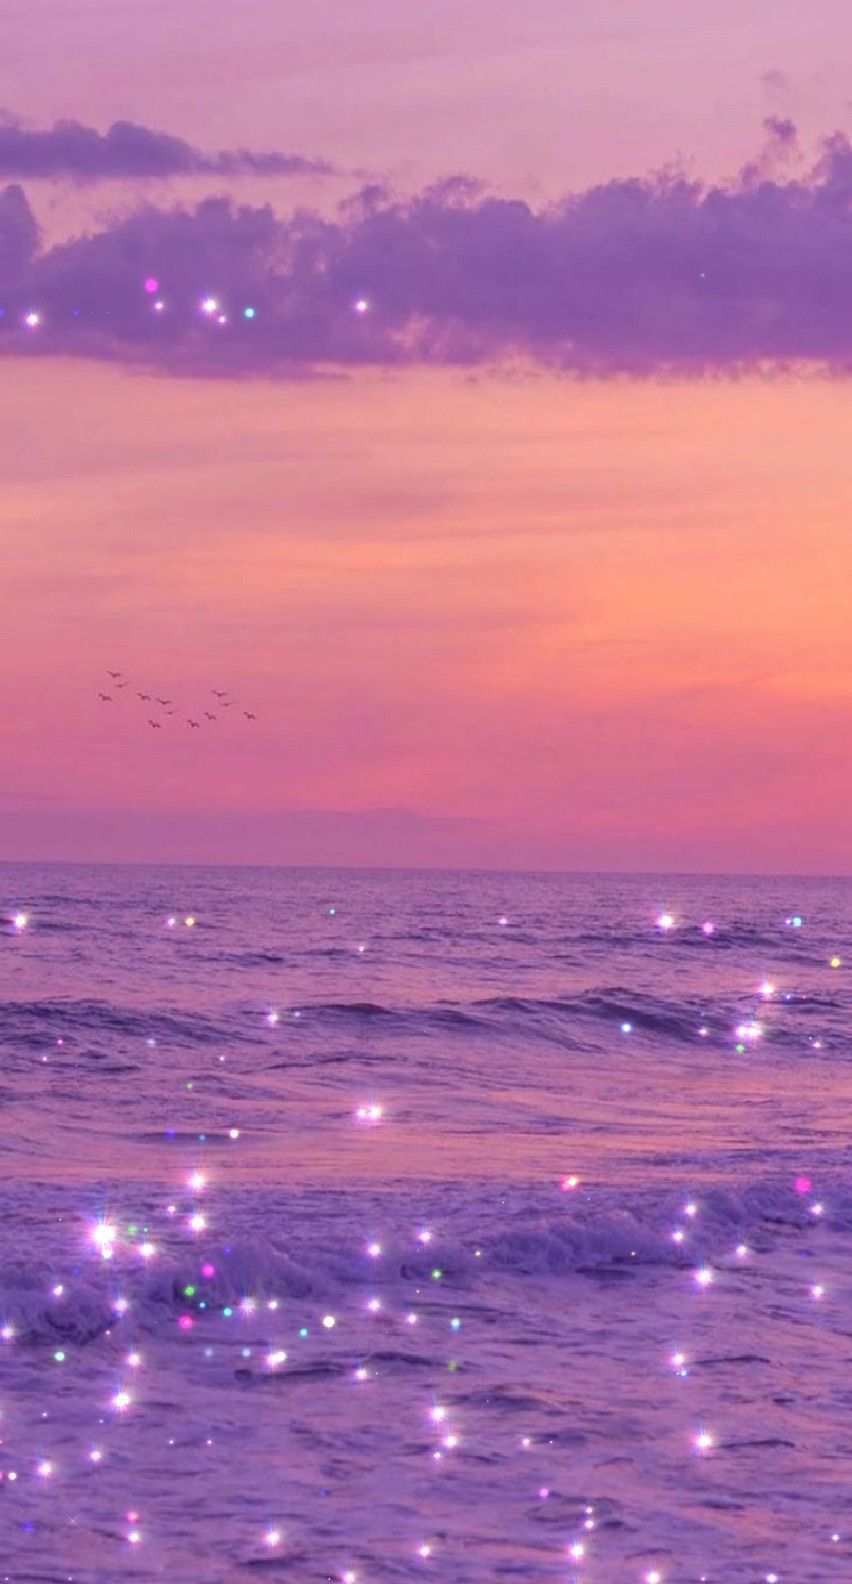 A purple sky with stars and birds flying over the ocean - TikTok, glitter